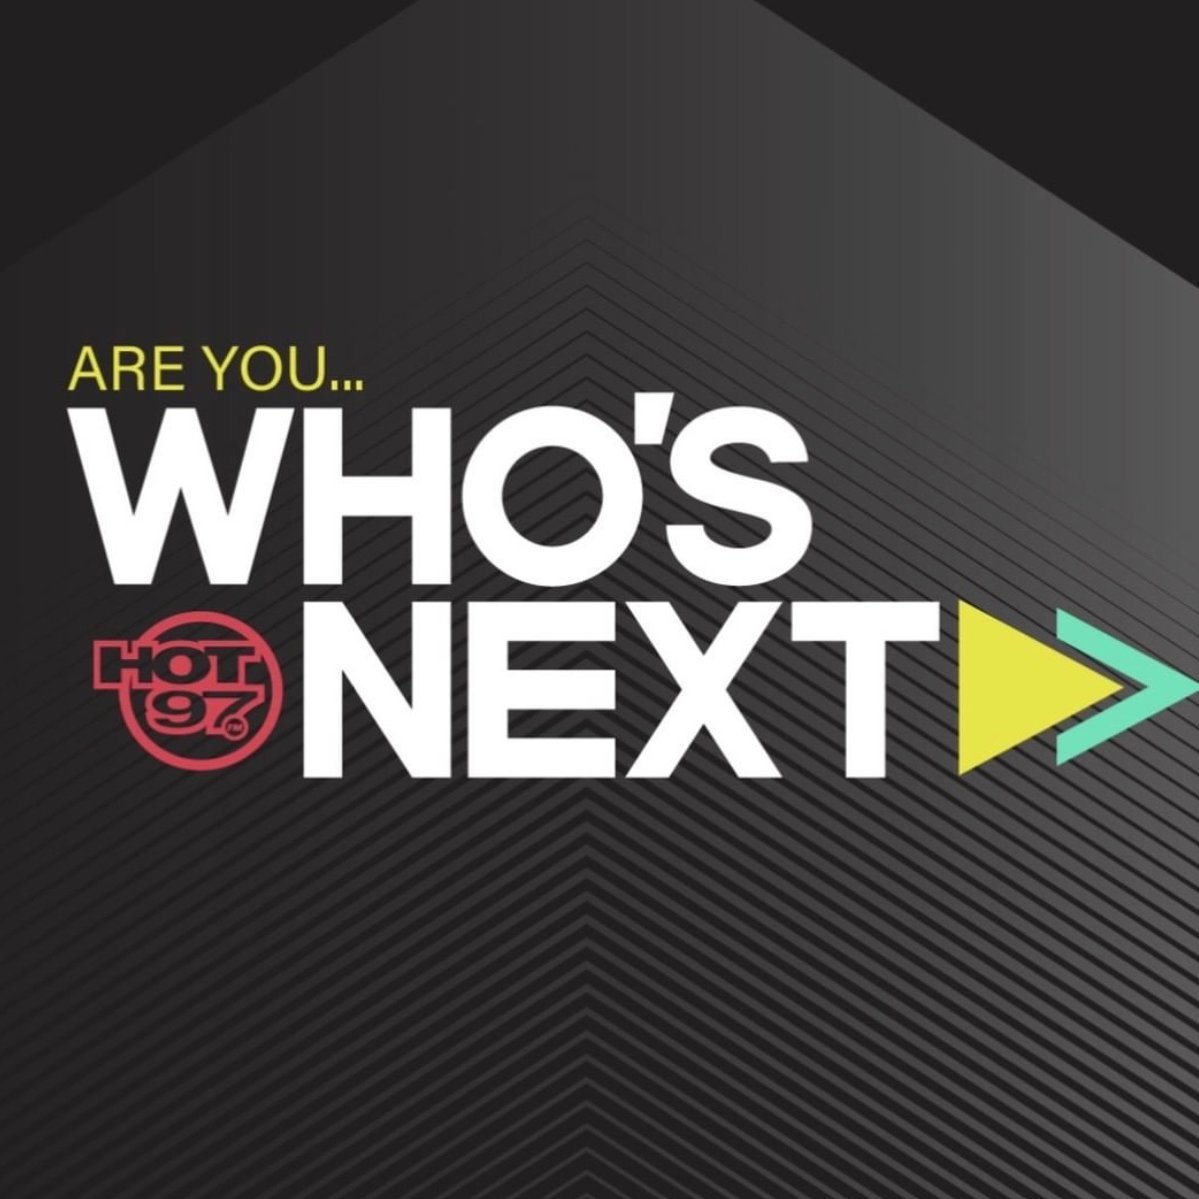 The new official #hot97whosnext account 
https://t.co/EGZSPi7M2w